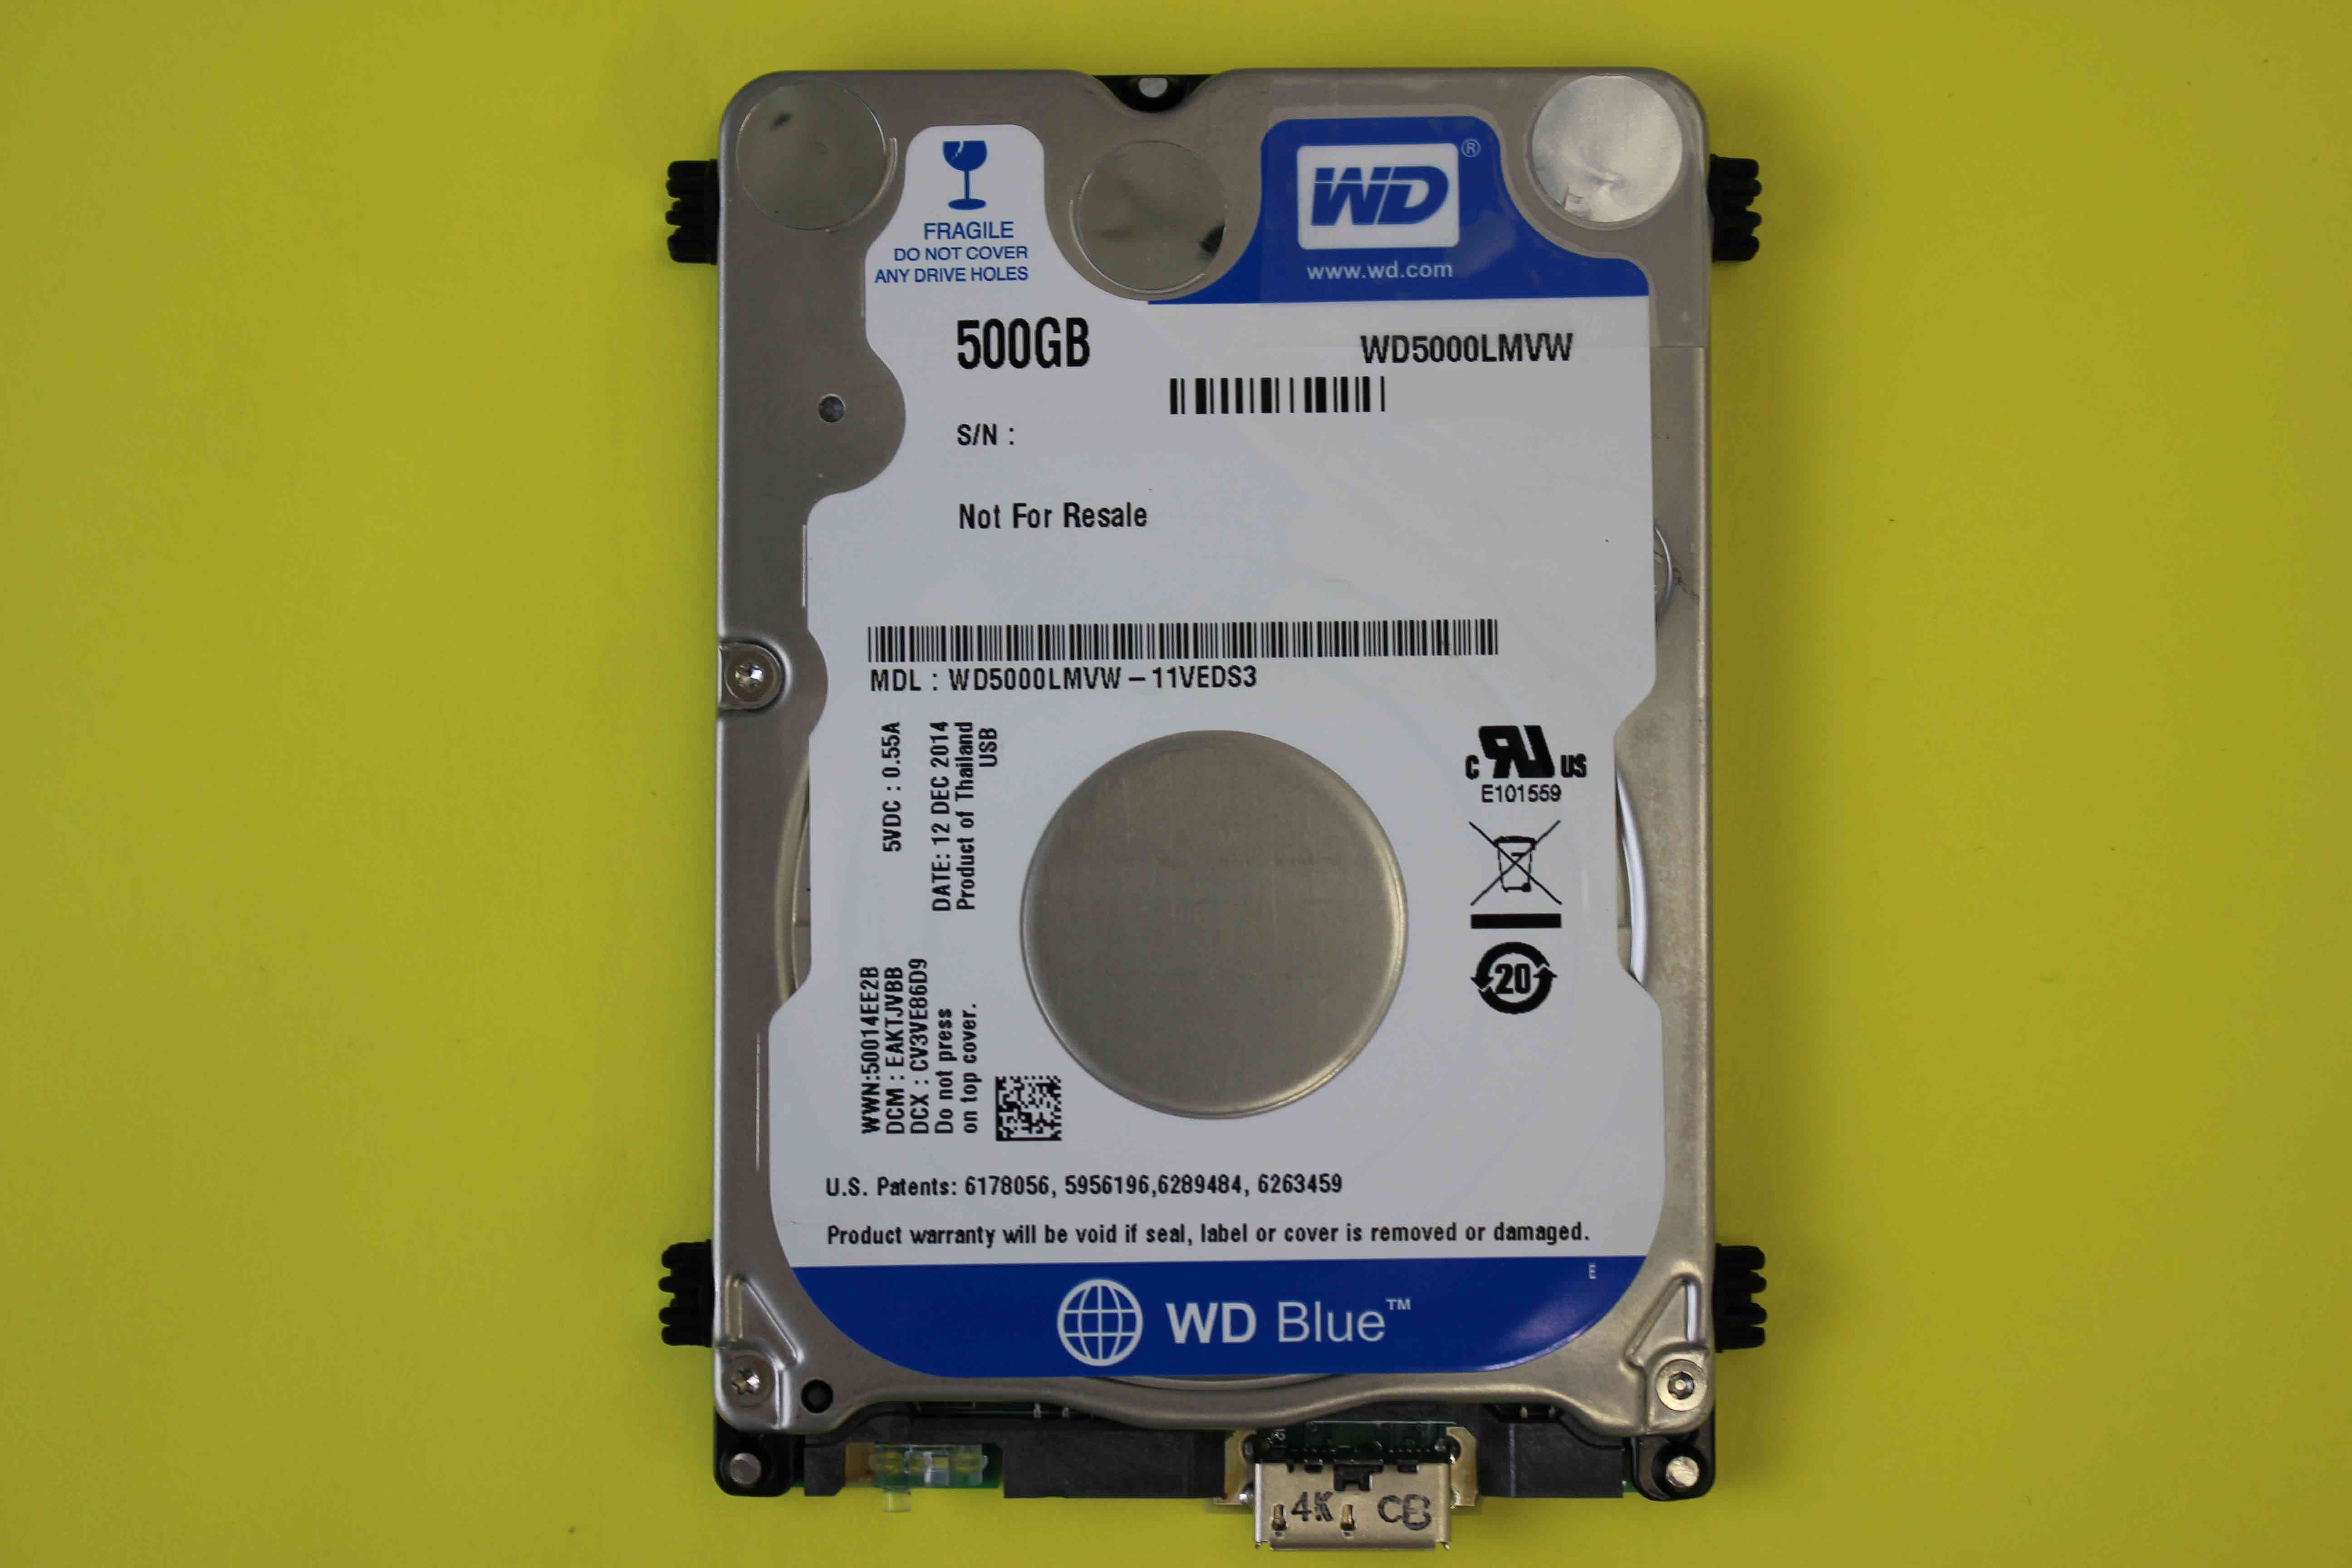 wd5000lmvw-11veds3-recovery